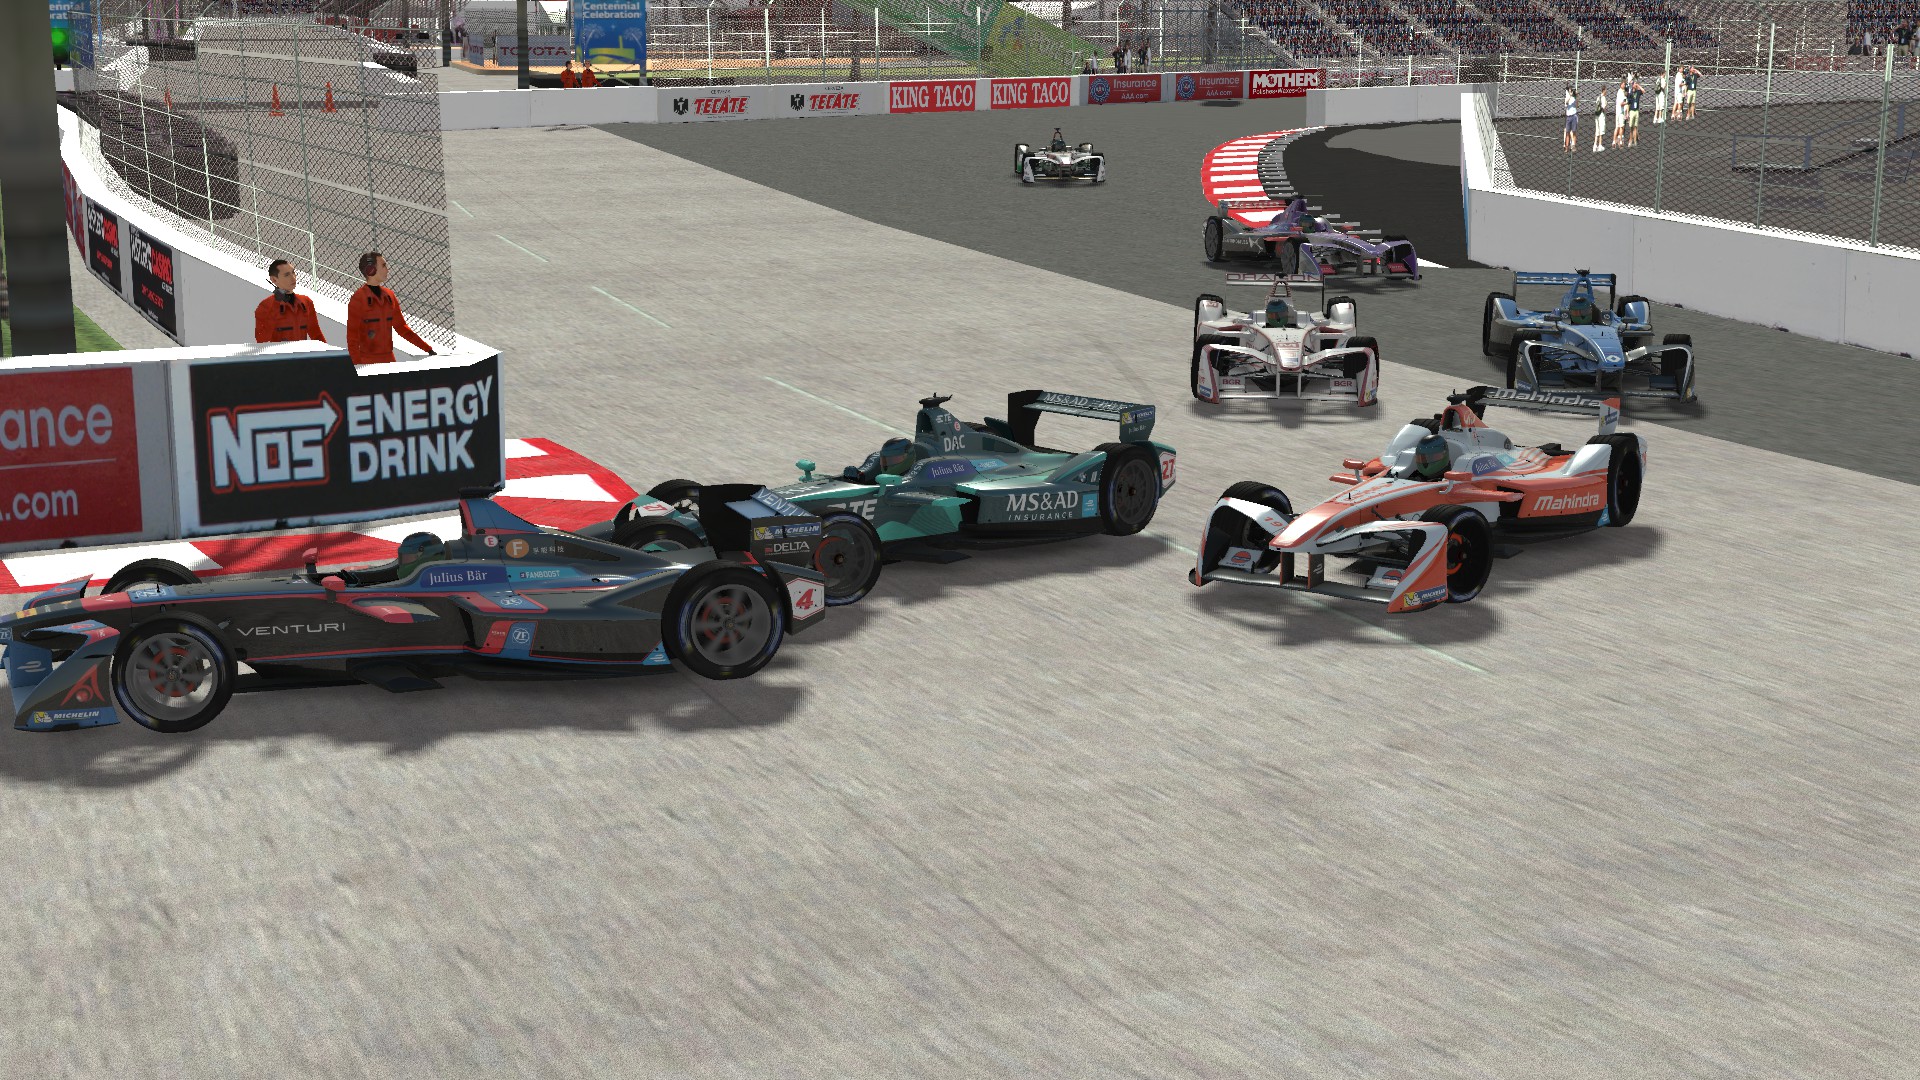 rfactor 2 cars and tracks download